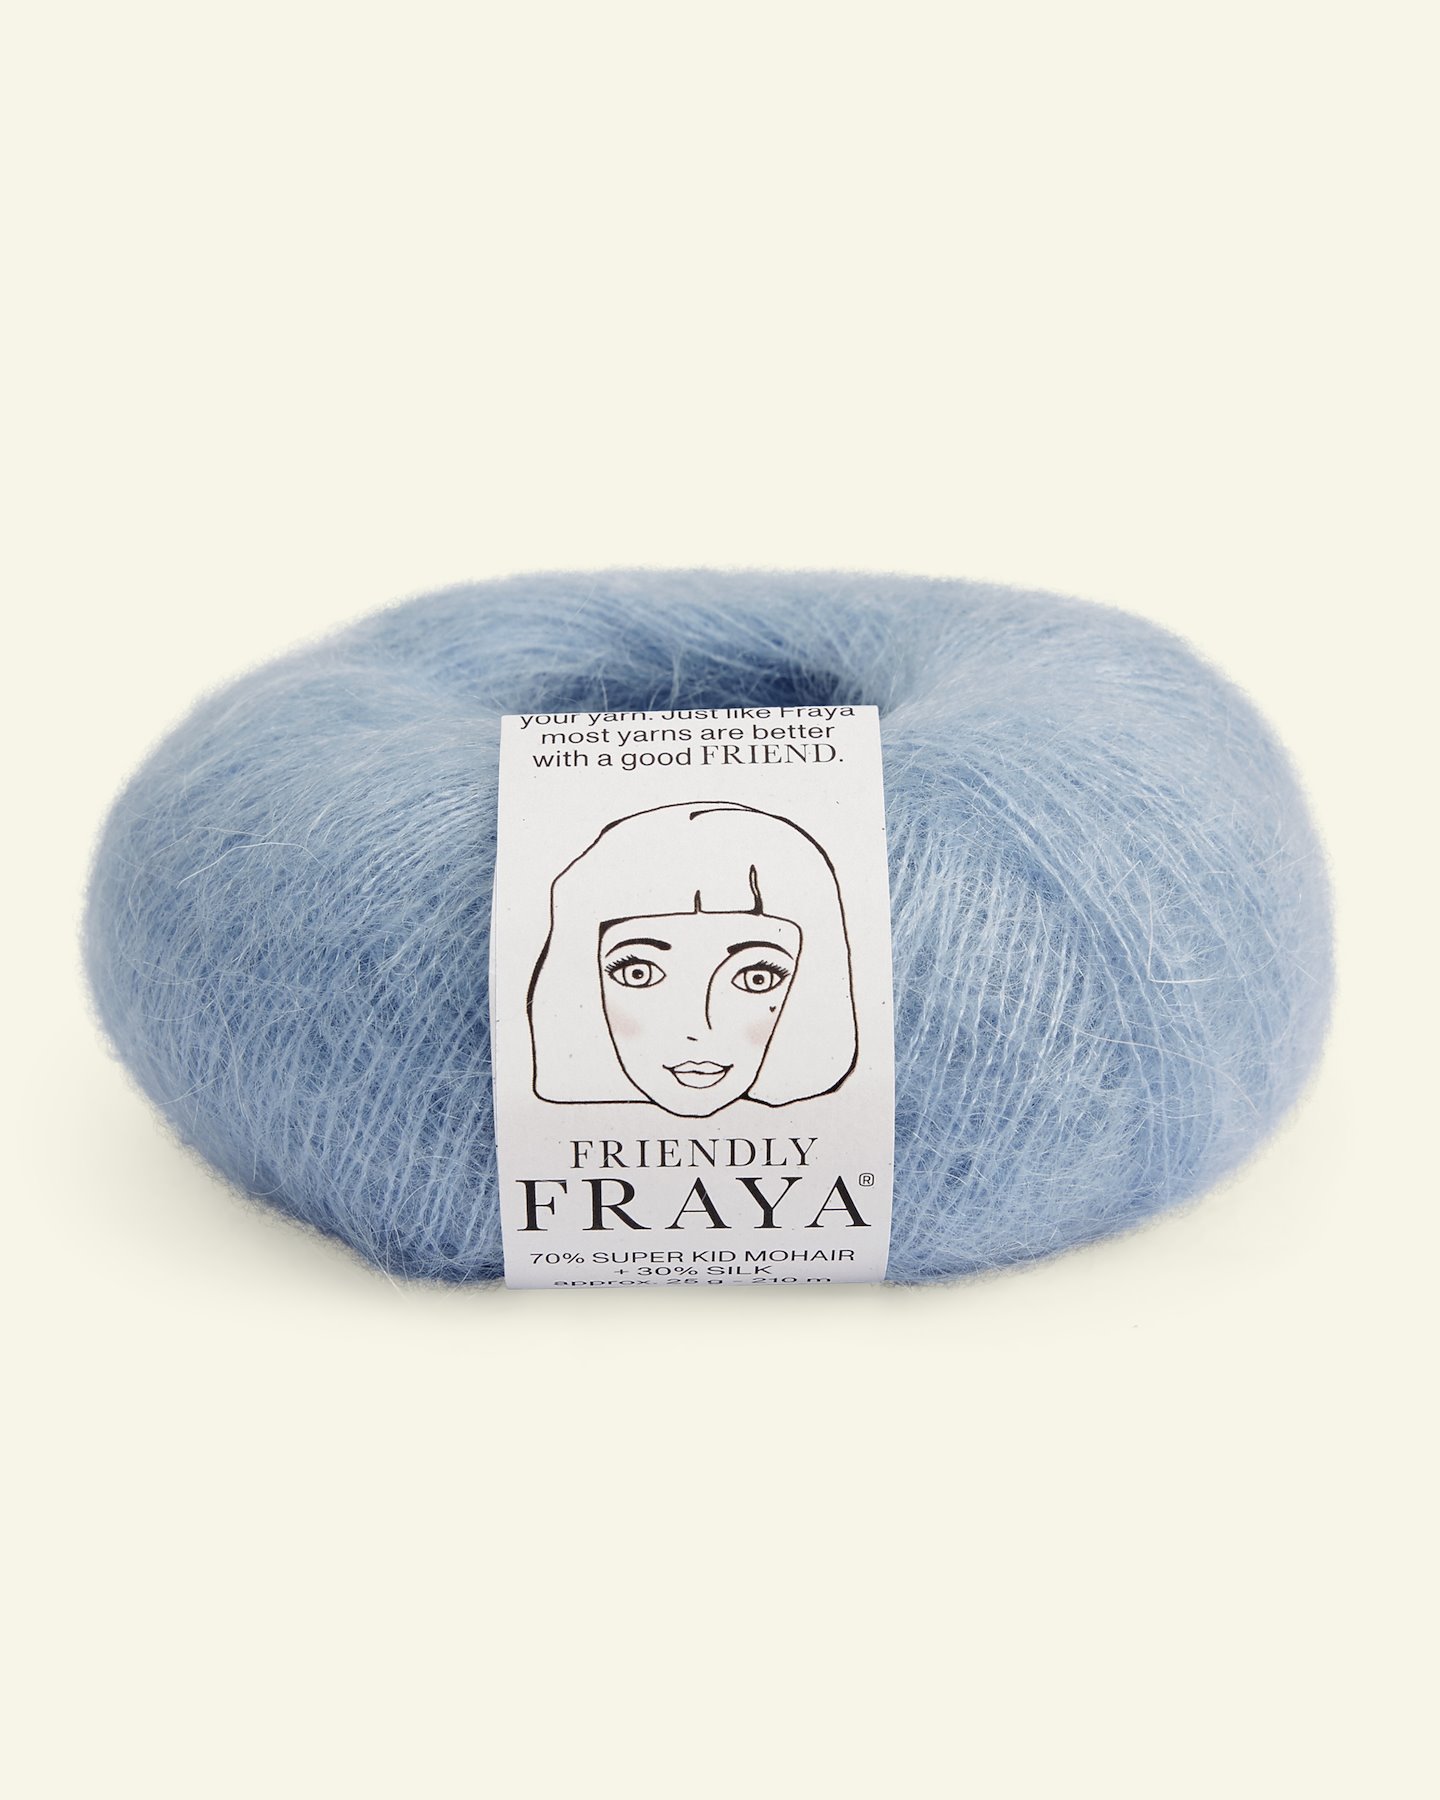 FRAYA, Wolle Seide Mohair "Friendly", hellviolet 90000955_pack